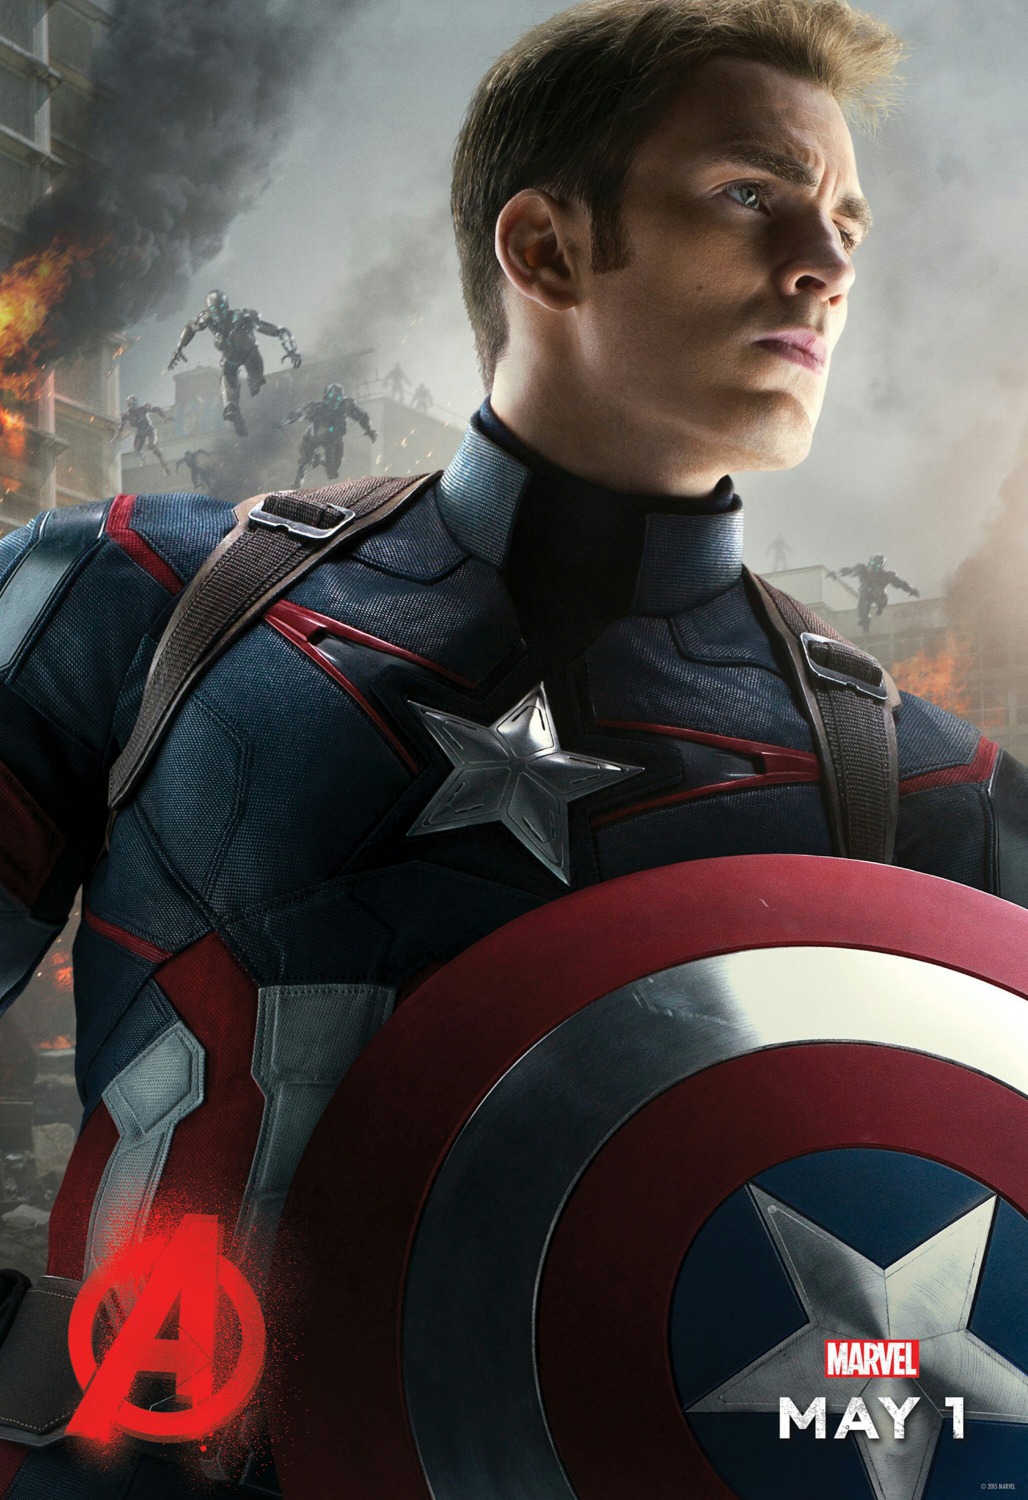 Extra Large Movie Poster Image for Avengers: Age of Ultron (#19 of 36)